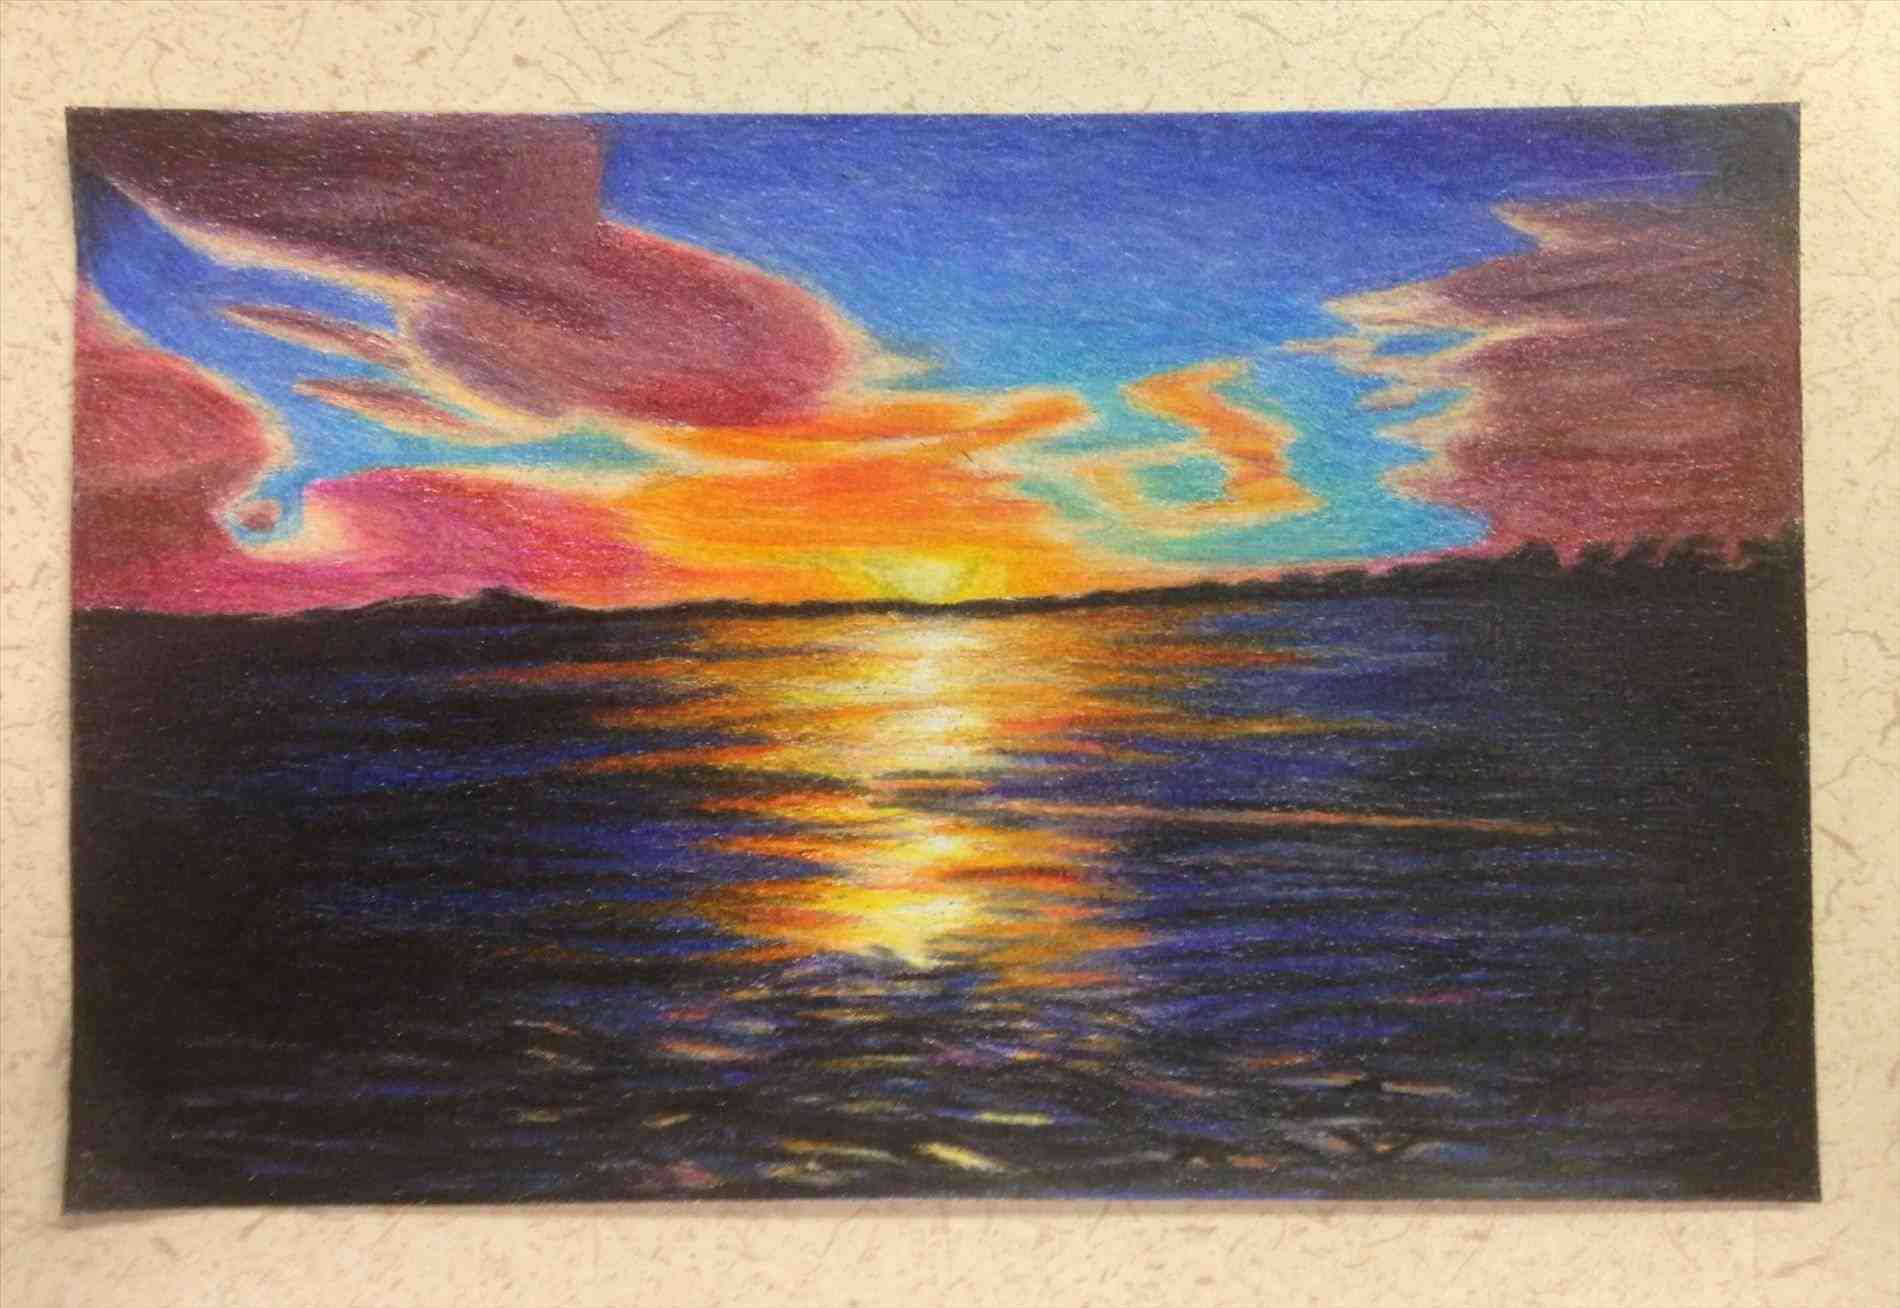 How To Draw A Sunset With Colored Pencils For Beginners